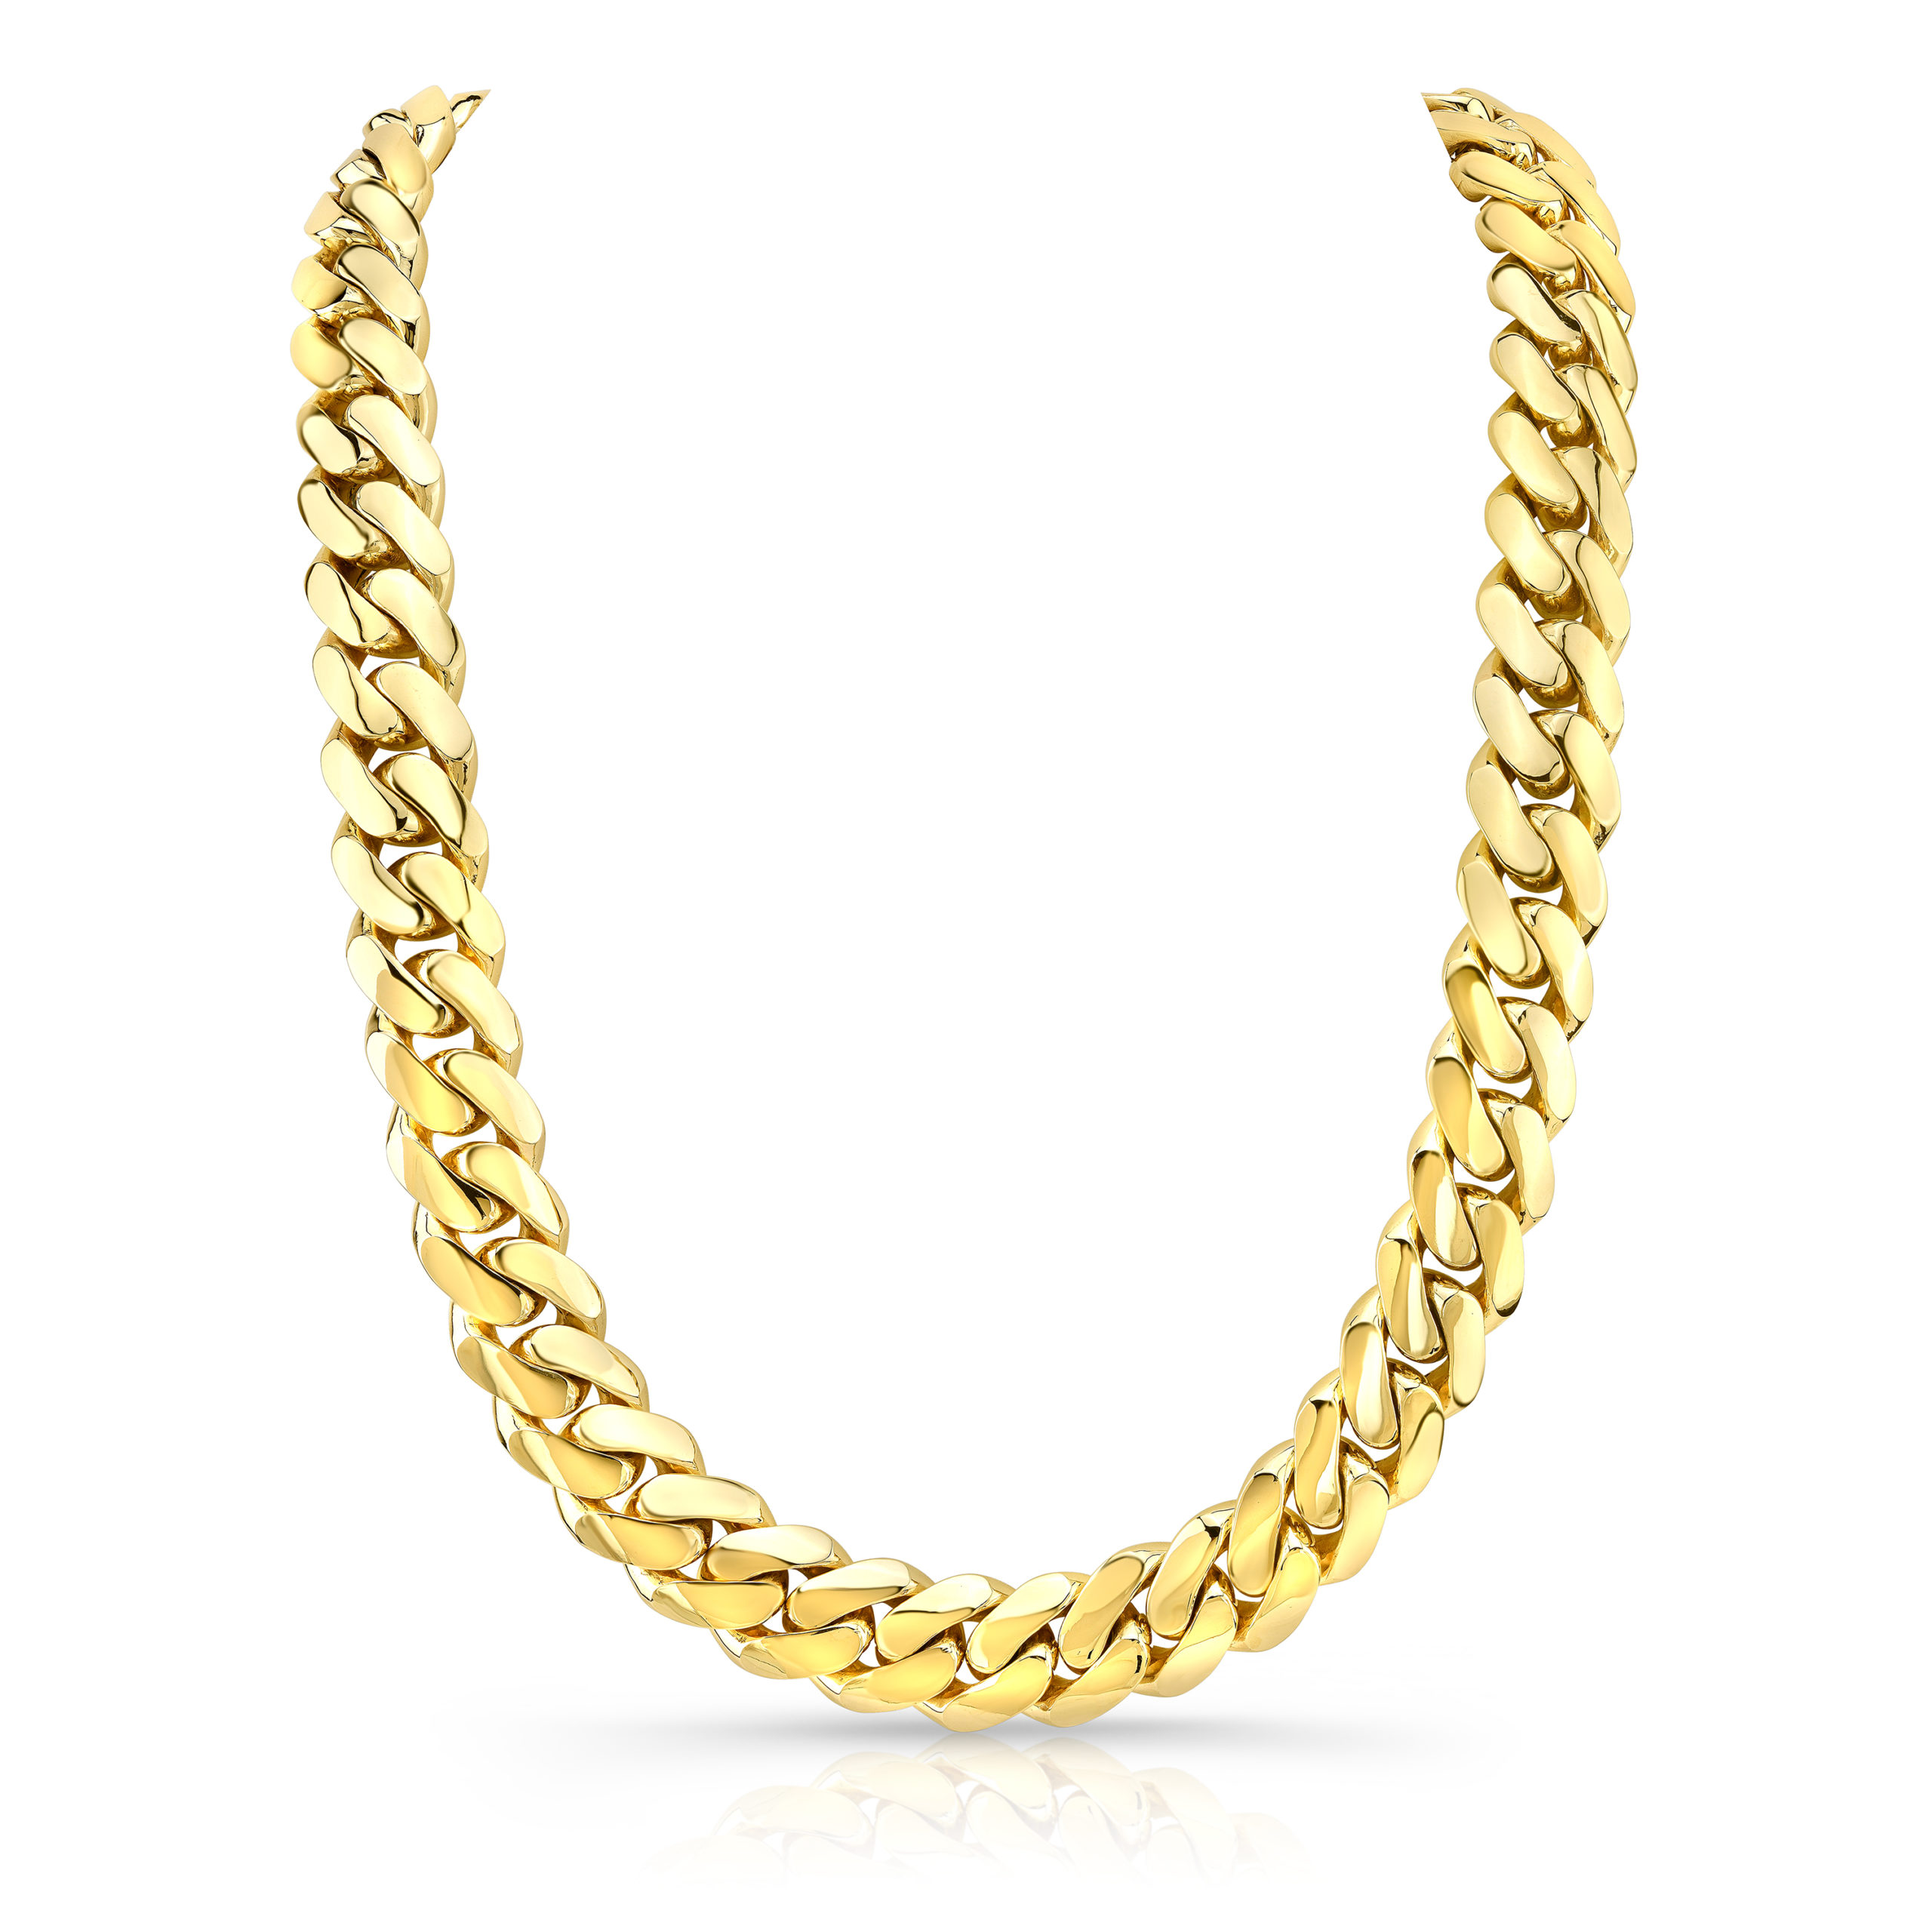 Authentic 22kt yellow gold handmade solid gold curb cuban link chain  bracelet fabulous diamond cut design mens jewelry br21  TRIBAL ORNAMENTS